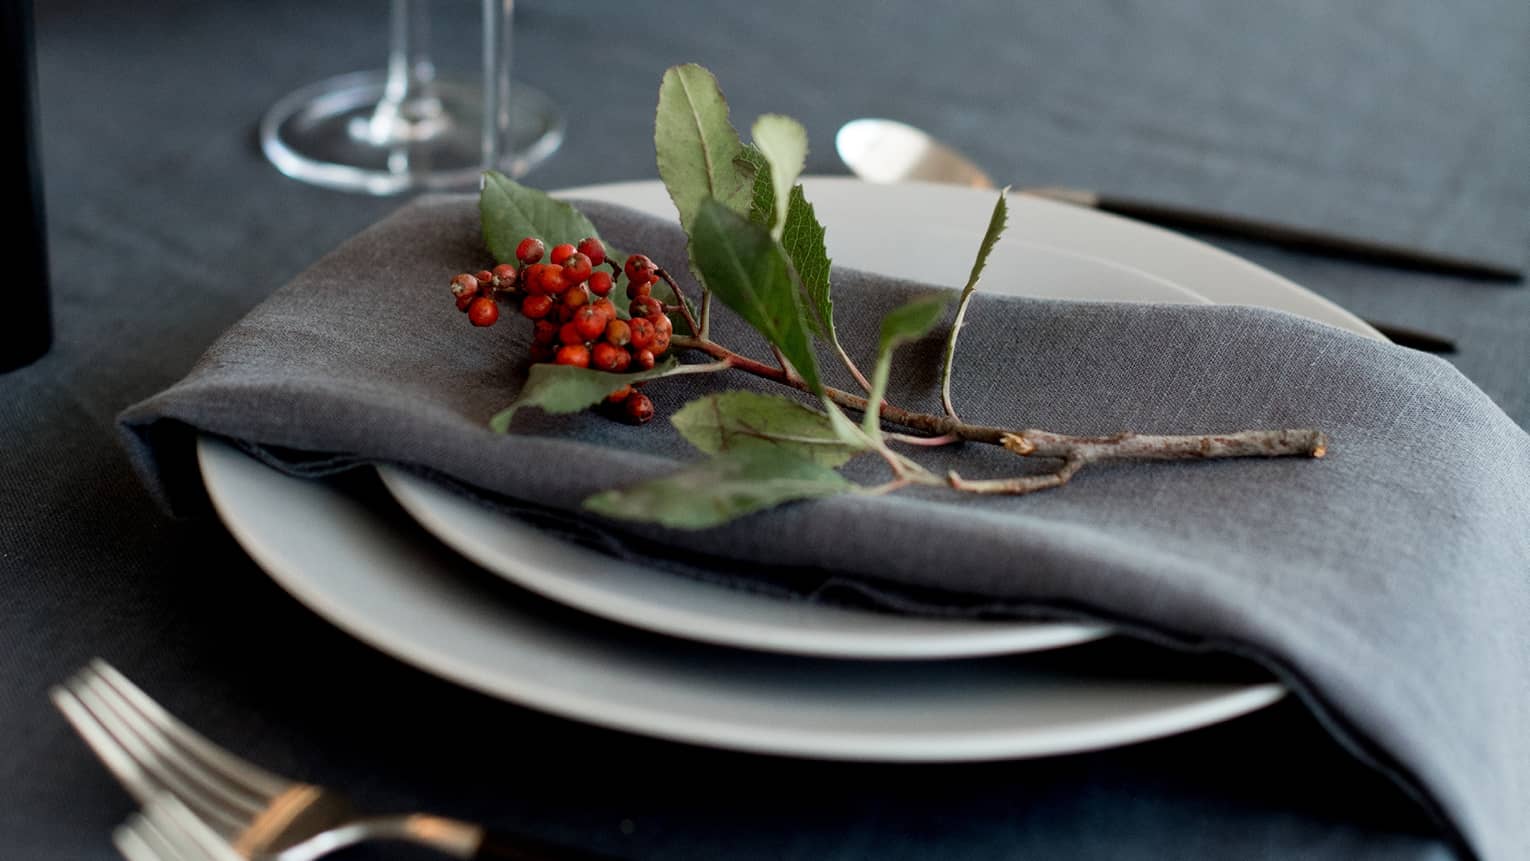 Table setting with white china topped with grey napkin and sprig of holly, cutlery, glasses